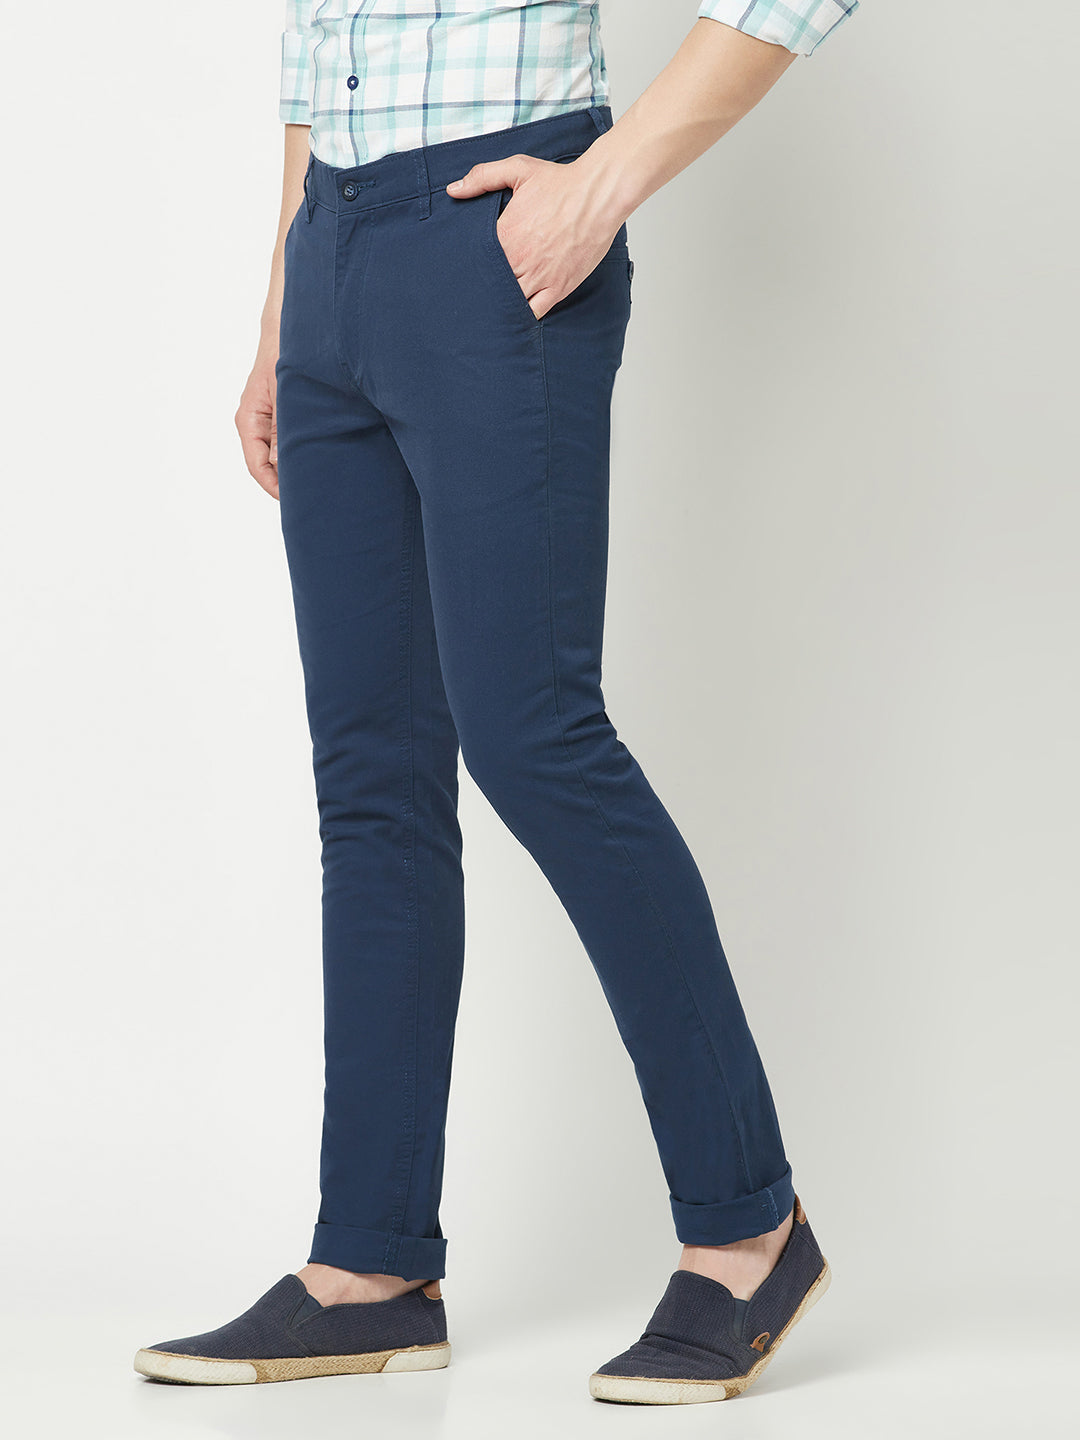  Blue Business Trousers